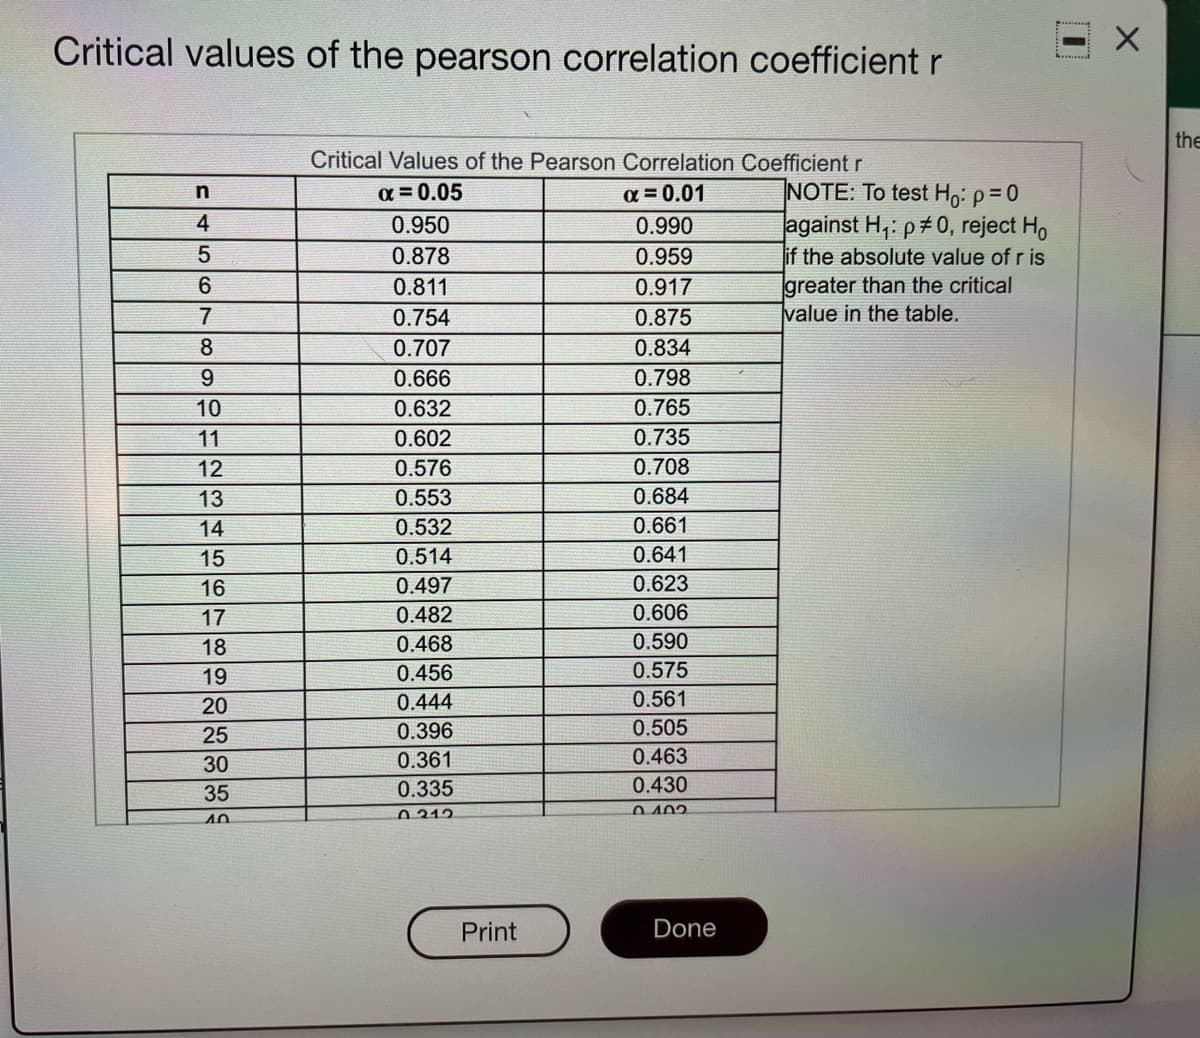 Critical values of the pearson correlation coefficient r
the
Critical Values of the Pearson Correlation Coefficient r
NOTE: To test Ho: p=0
against H,: p 0, reject Ho
if the absolute value of r is
greater than the critical
value in the table.
a = 0.05
a = 0.01
4
0.950
0.990
5
0.878
0.959
6.
0.811
0.917
0.754
0.875
8.
0.707
0.834
9
0.666
0.798
10
0.632
0.765
11
0.602
0.735
12
0.576
0.708
13
0.553
0.684
14
0.532
0.661
15
0.514
0.641
16
0.497
0.623
17
0.482
0.606
18
0.468
0.590
19
0.456
0.575
20
0.444
0.561
25
0.396
0.505
30
0.361
0.463
35
0.335
0.430
0 402.
40
0312
Print
Done
